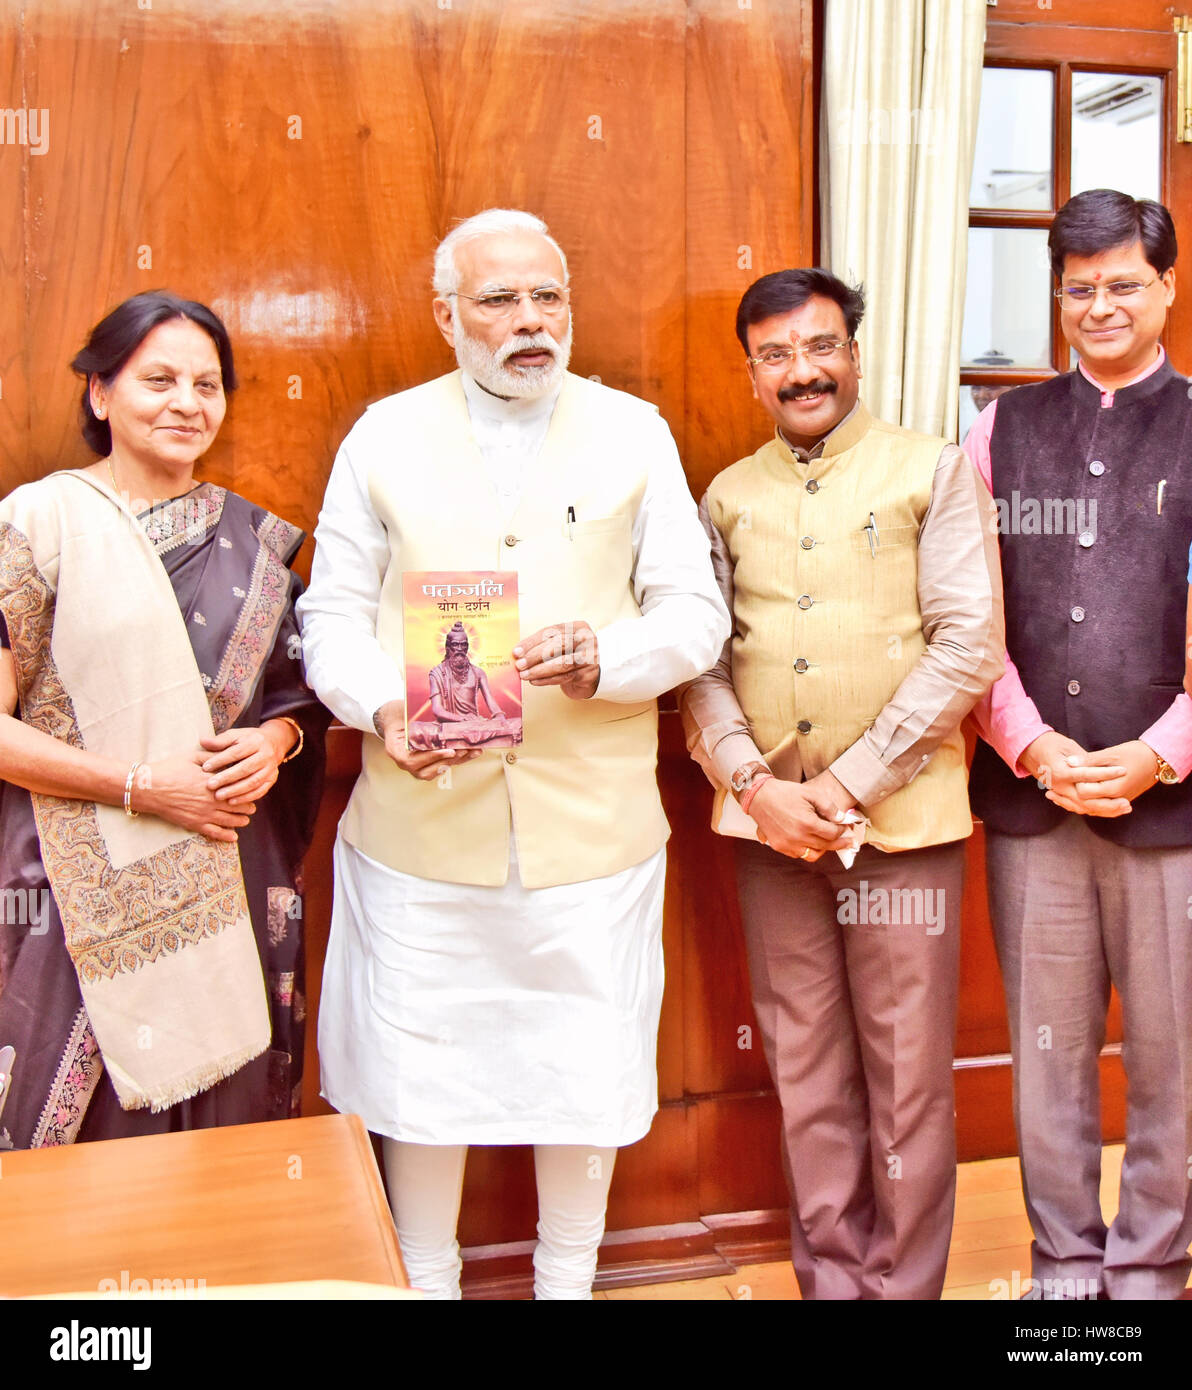 New Delhi, March, 18, 2017. Vedic wizard Dr Mridul Kirti presented her newly published book Patanjali Yog-Darshan, published by Prabhat Prakashan, to Honorable Prime Minister of India Shri Narendra Modi. Spun with an engaging narrative and written in a simple language, Patanjali Yog-Darshan is a unique compendium of mysteries and secrets of Yogic science that reveals the journey of life and death, secrets of mortal and immortal. The Prime Minister appreciated the work and gave his blessings to the author. He spoke on the richness of Indian Literature and said that we need to invest our efforts Stock Photo